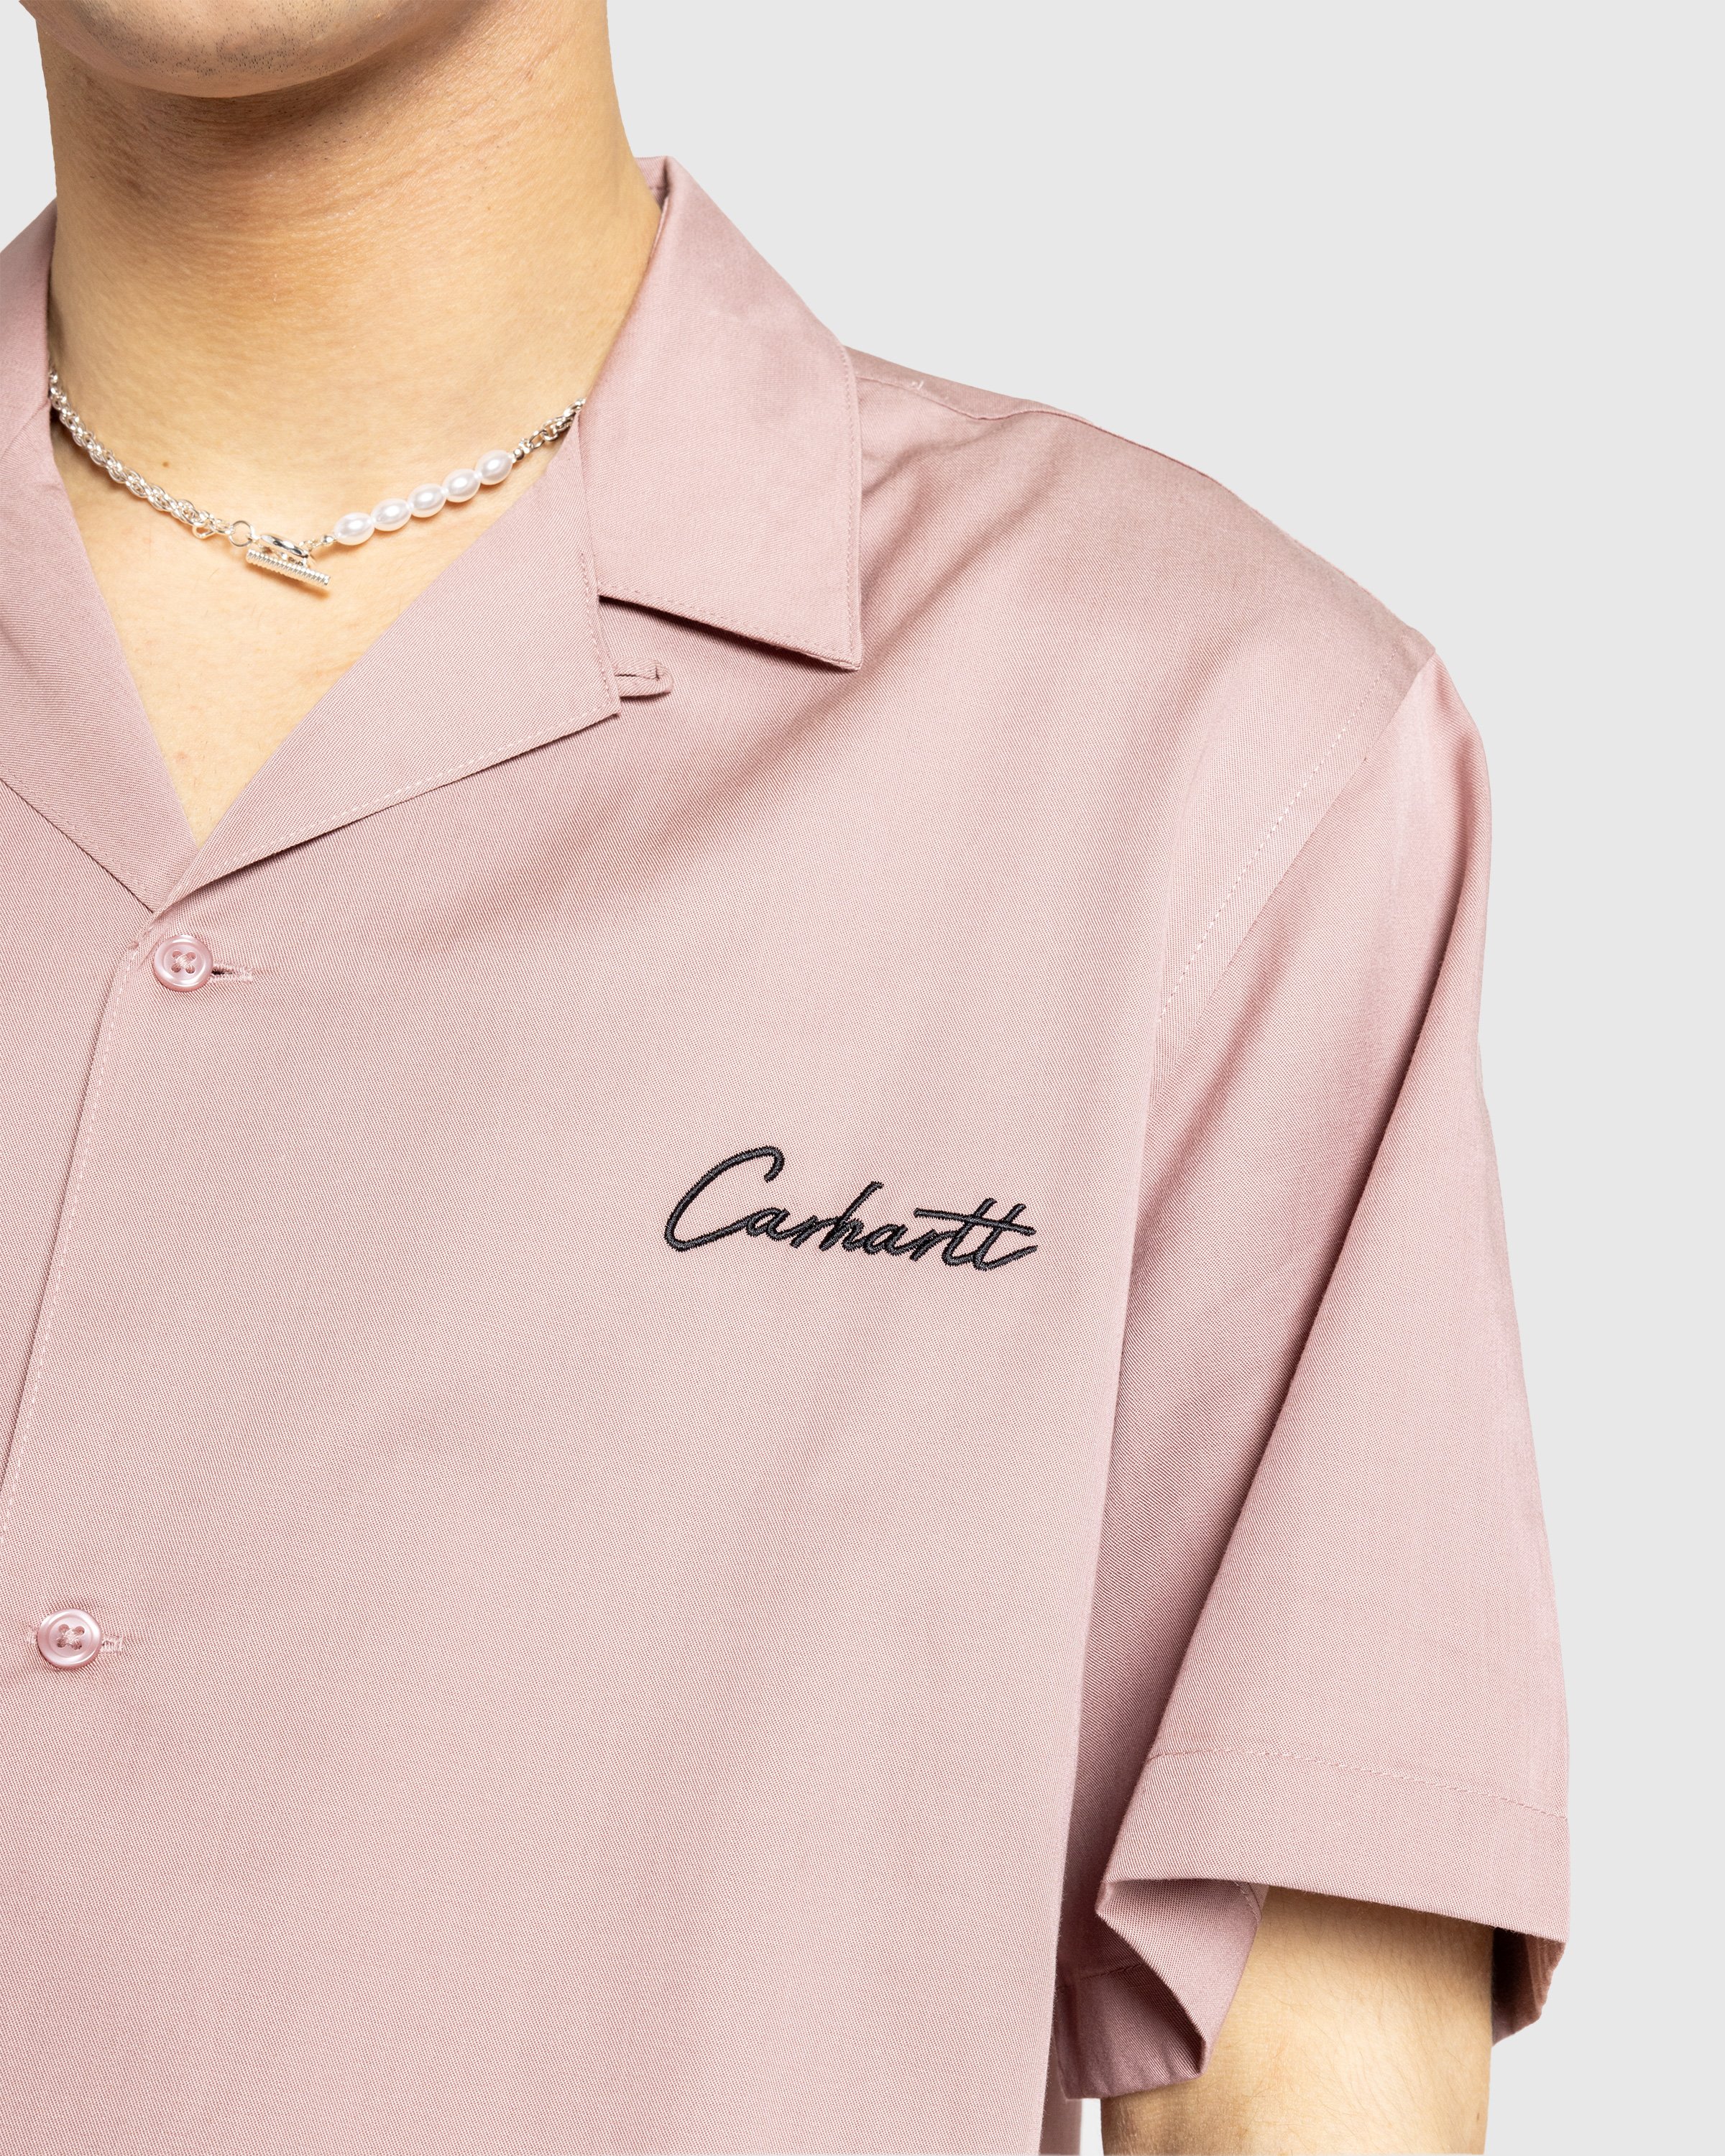 Carhartt WIP - S/S Delray Shirt Glassy Pink / Black - Clothing - Pink - Image 5